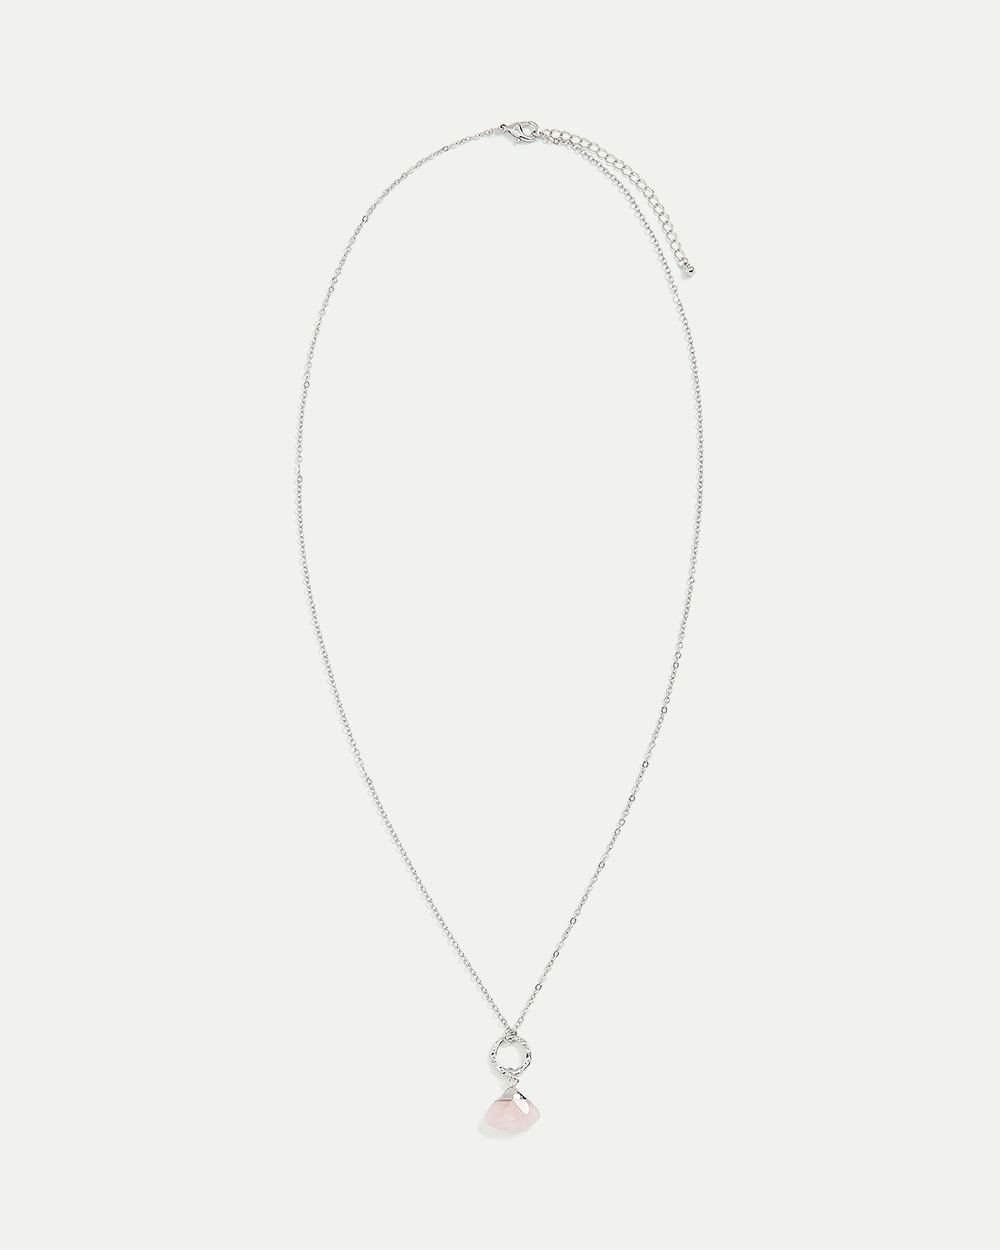 Long Necklace with Triangle Stone Pendant